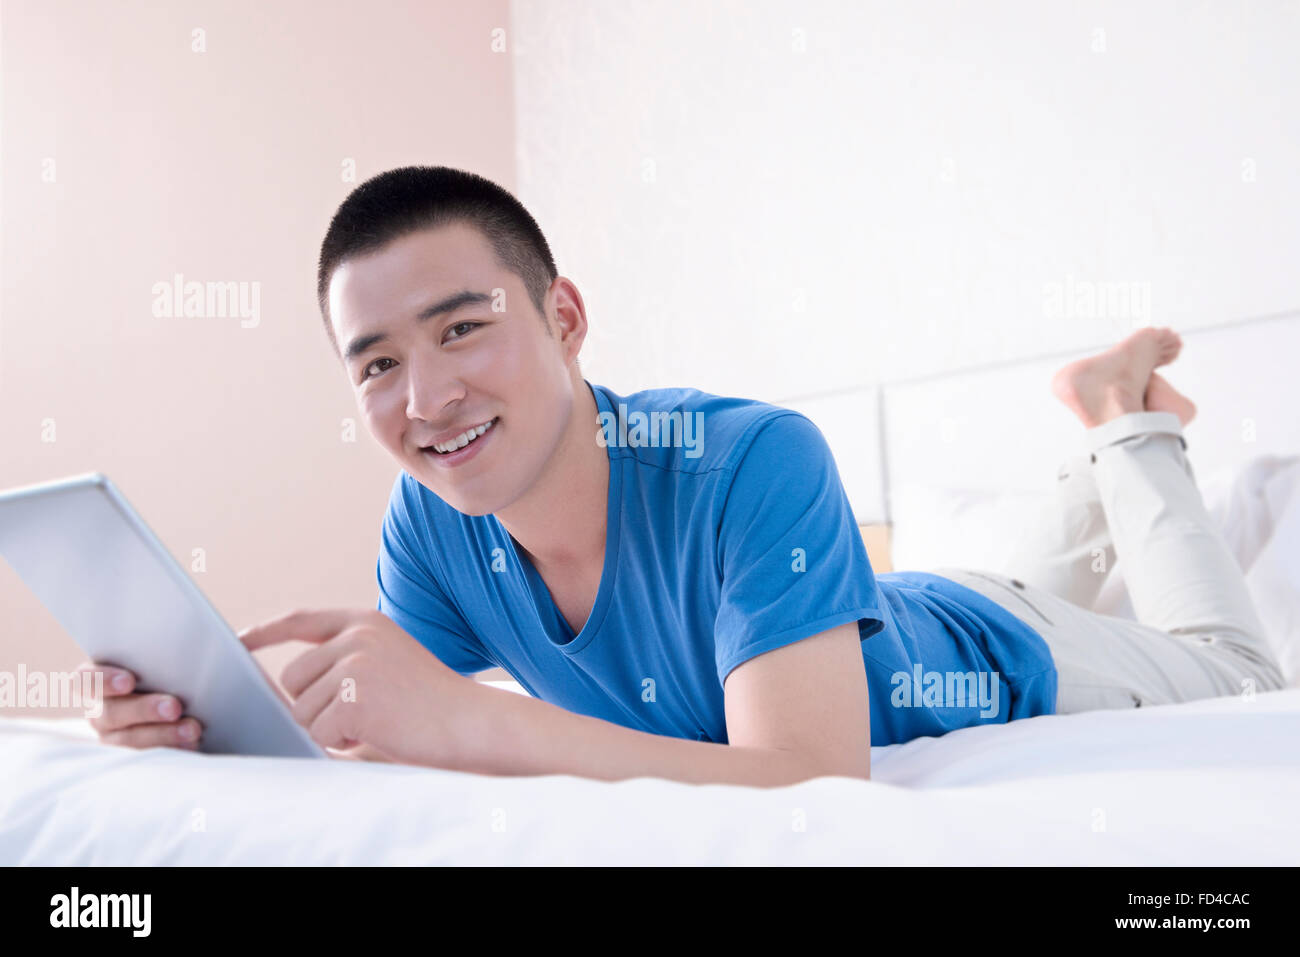 Young man using digital tablet in bed Banque D'Images